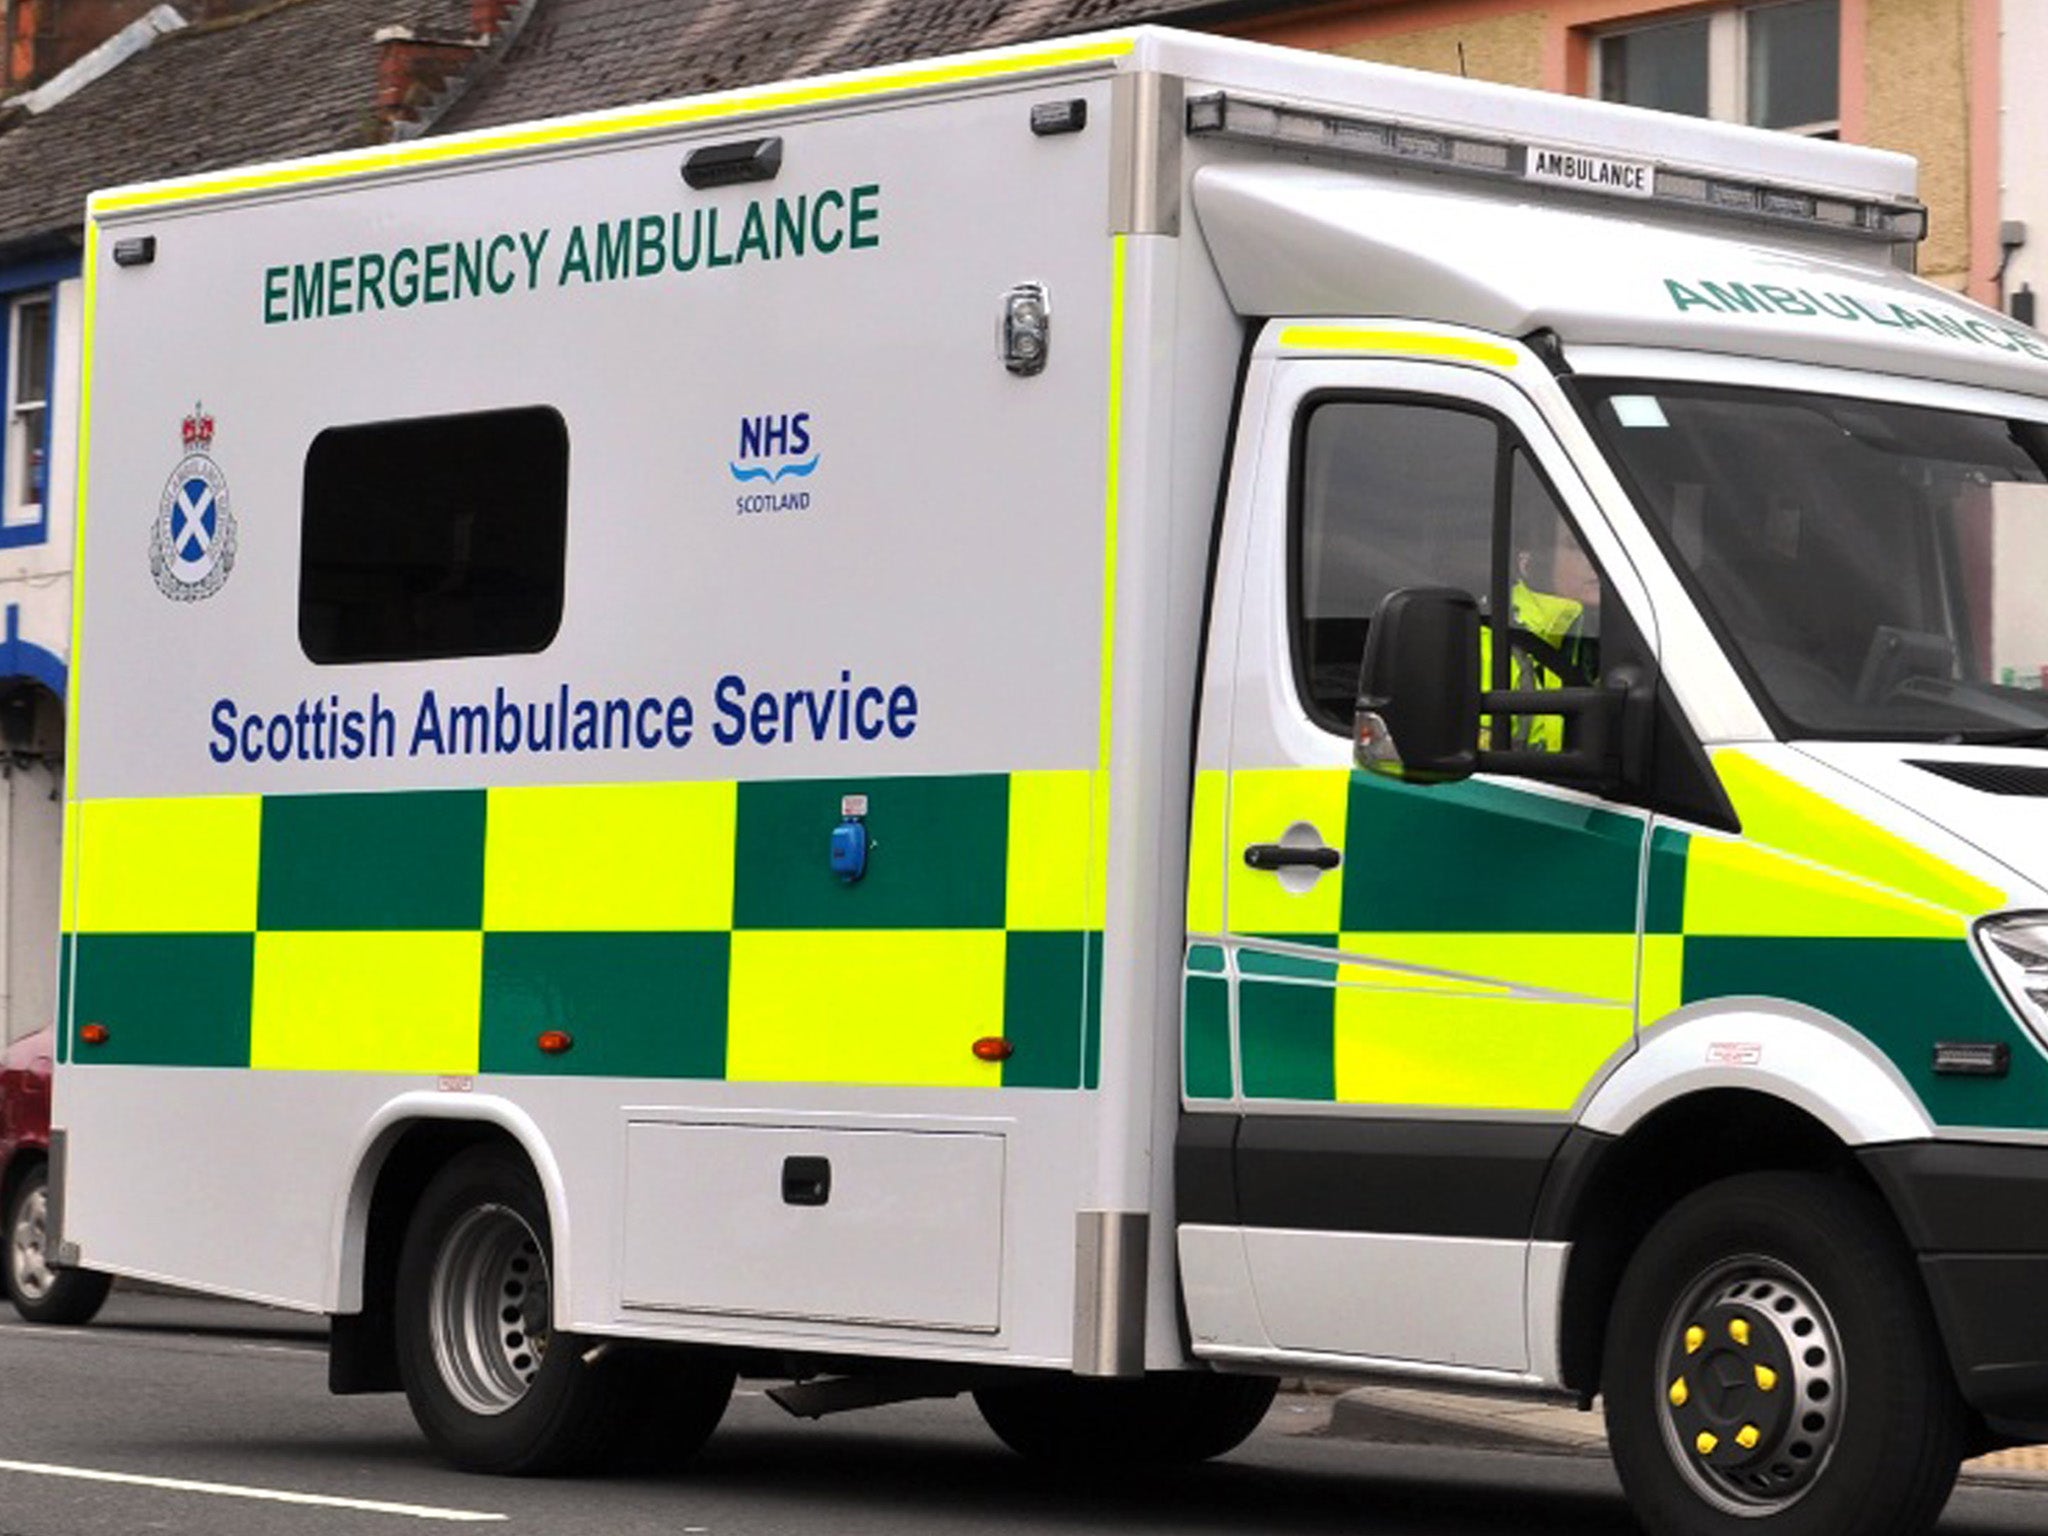 Police were notified by ambulance crew about "serious incident" involving toddler in Fife